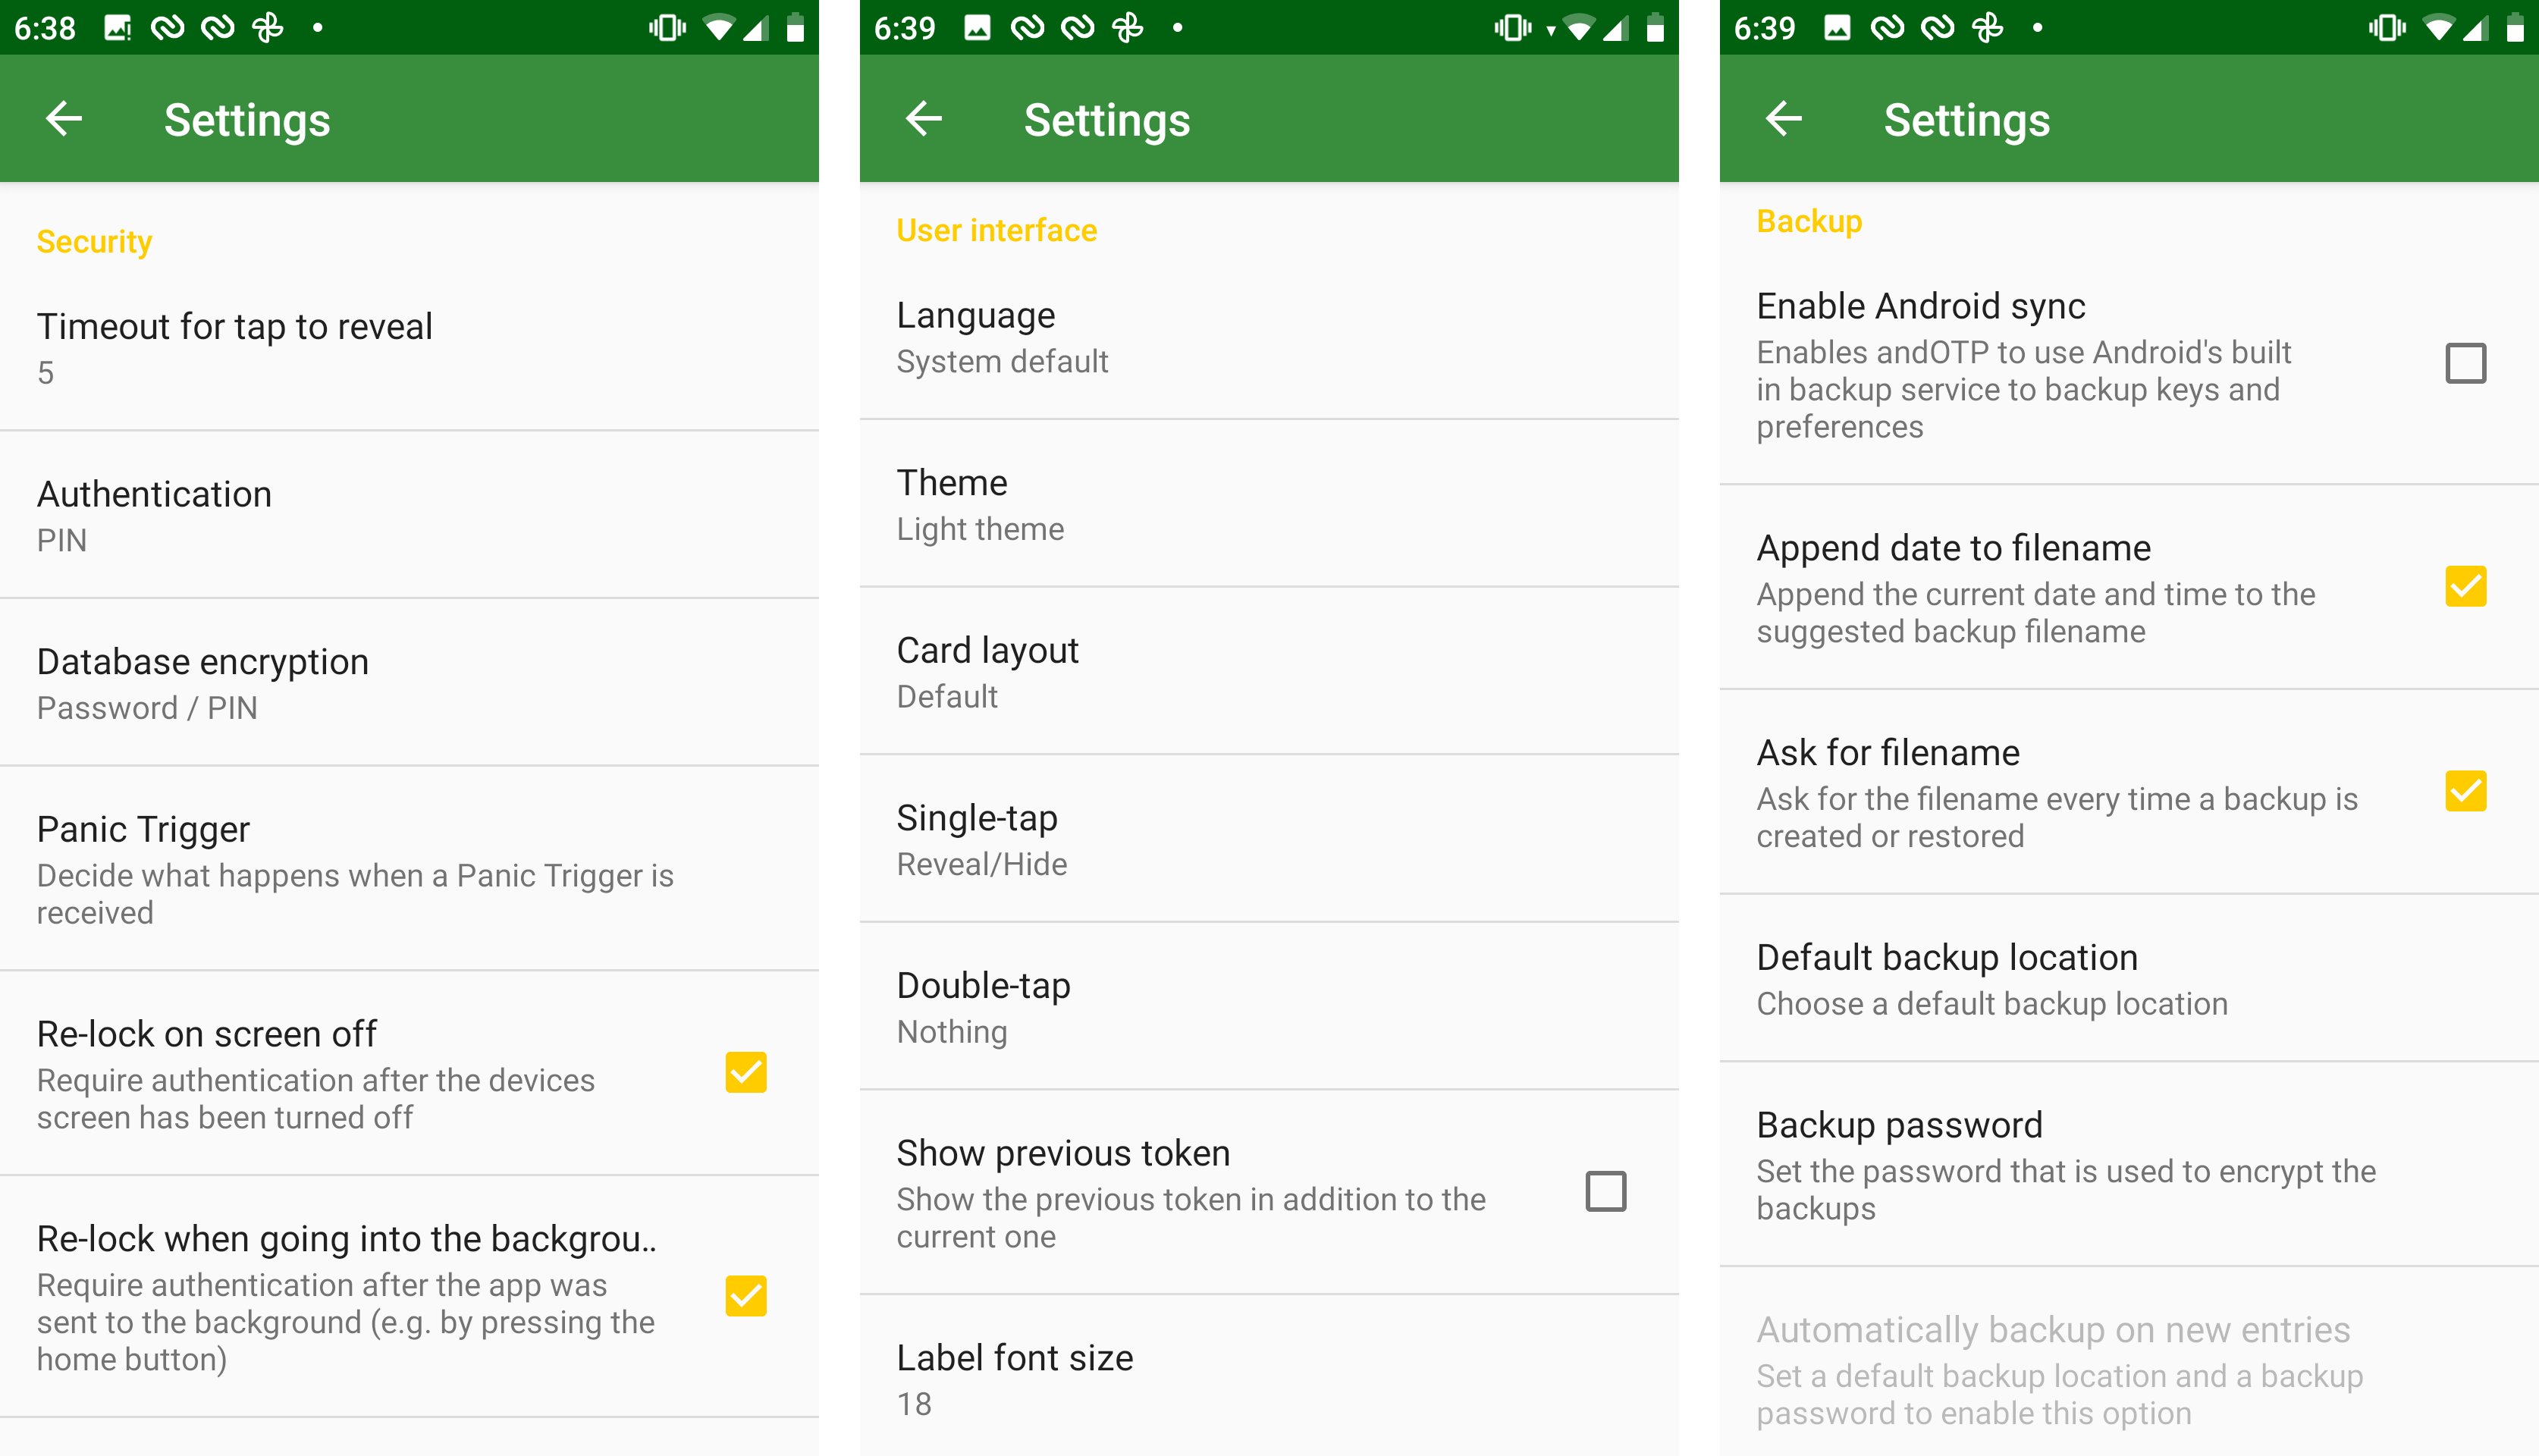 Like all authenticators for Android, andOTP blocks screenshots on a screen with codes, so here's the Settings menu